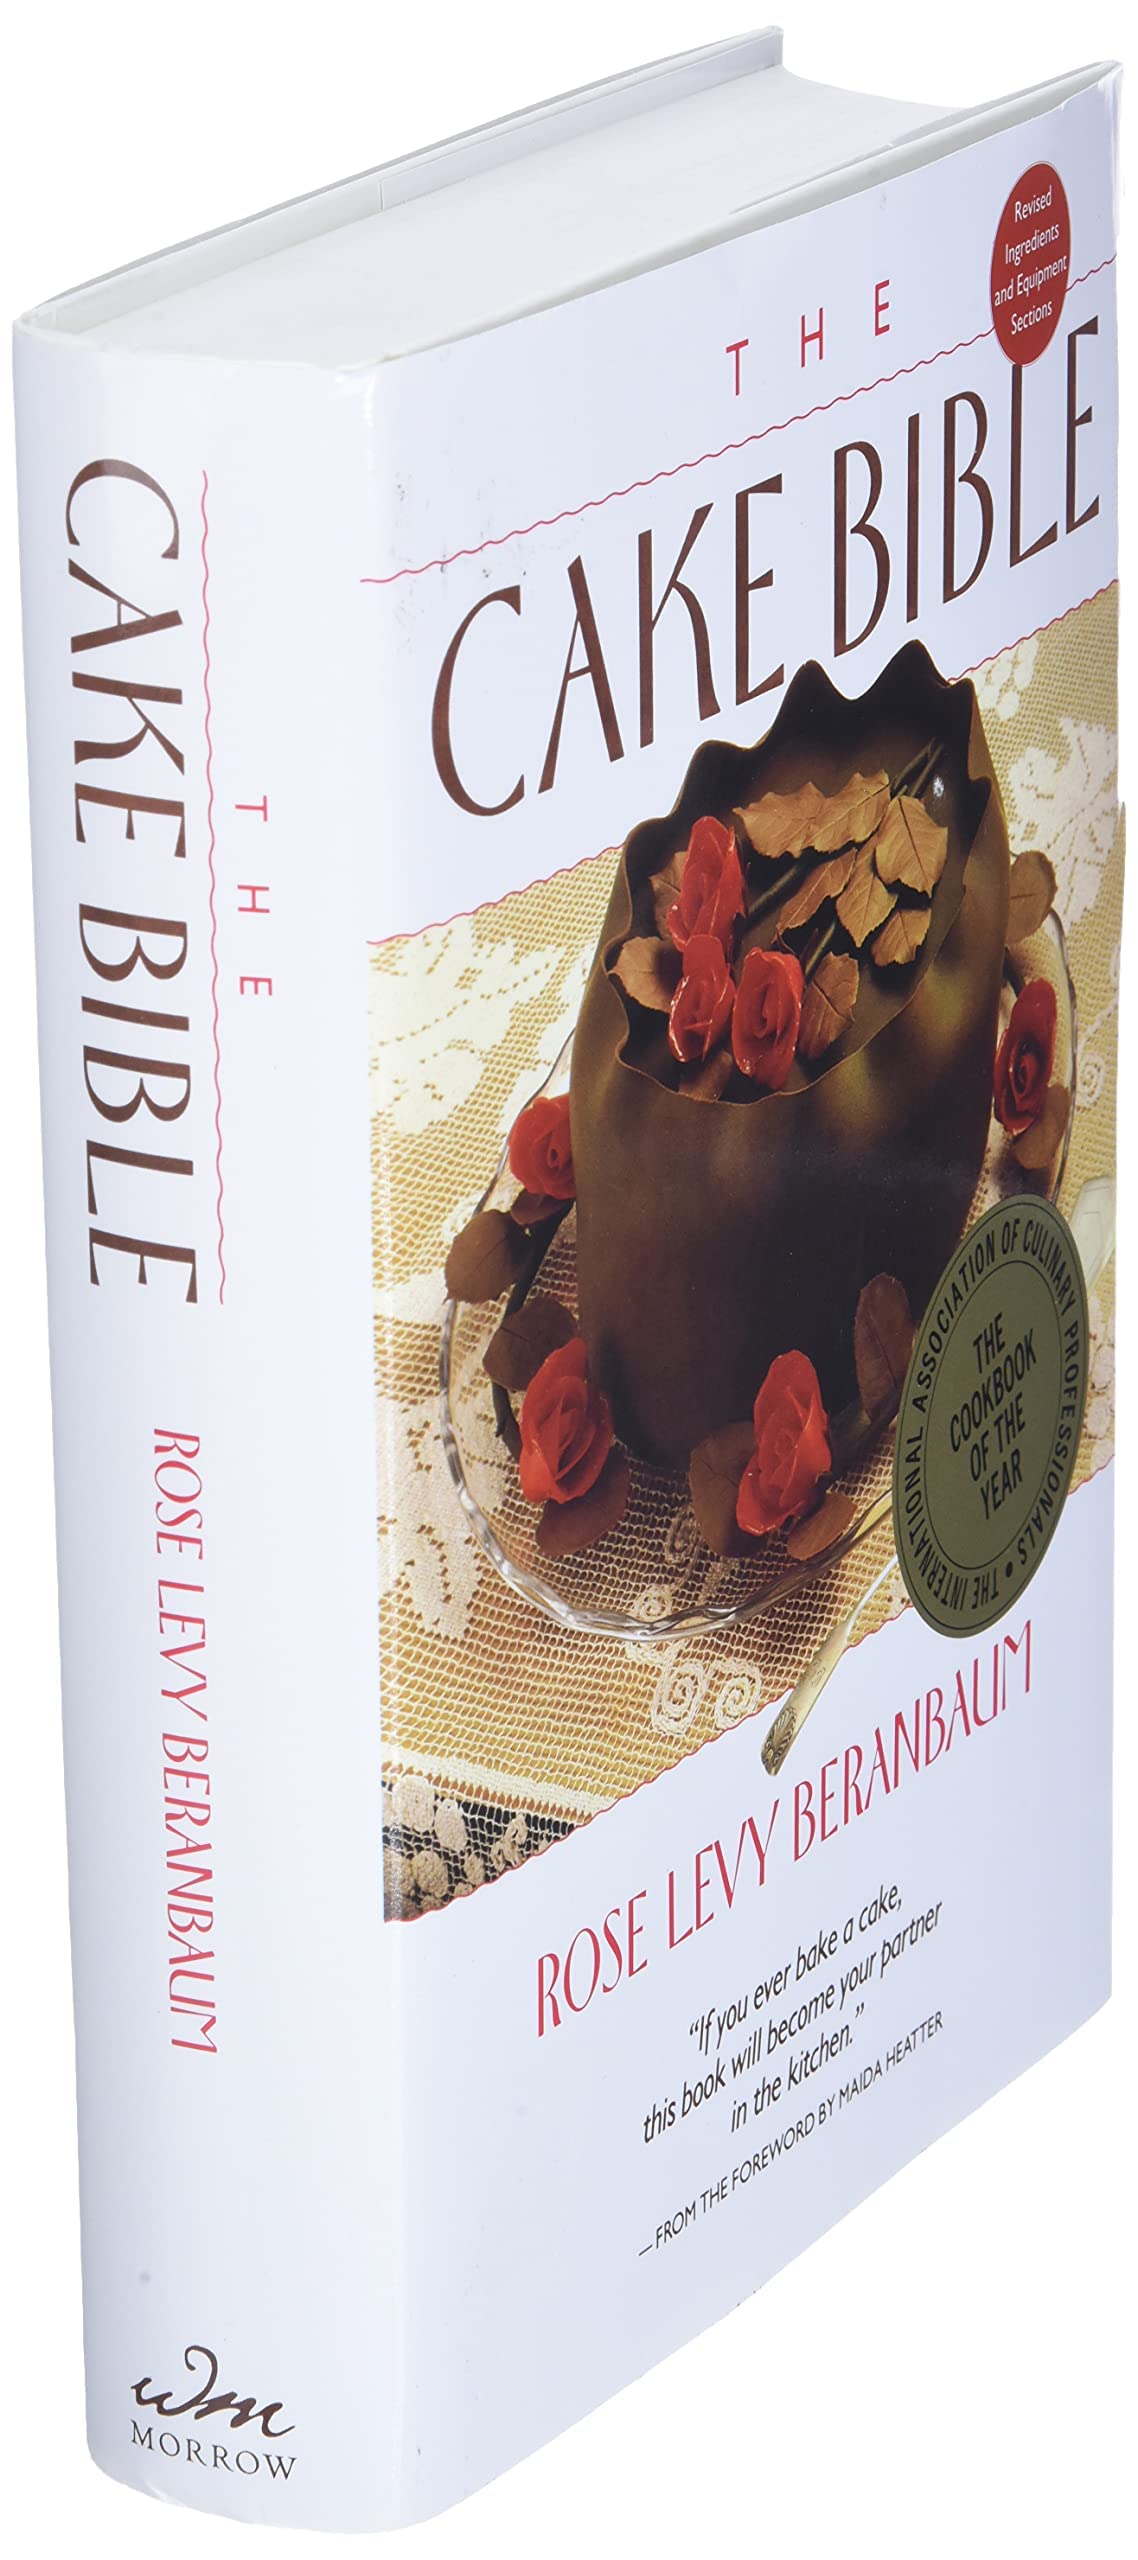 The Cake Bible by Rose Levy Beranbaum book review - YouTube